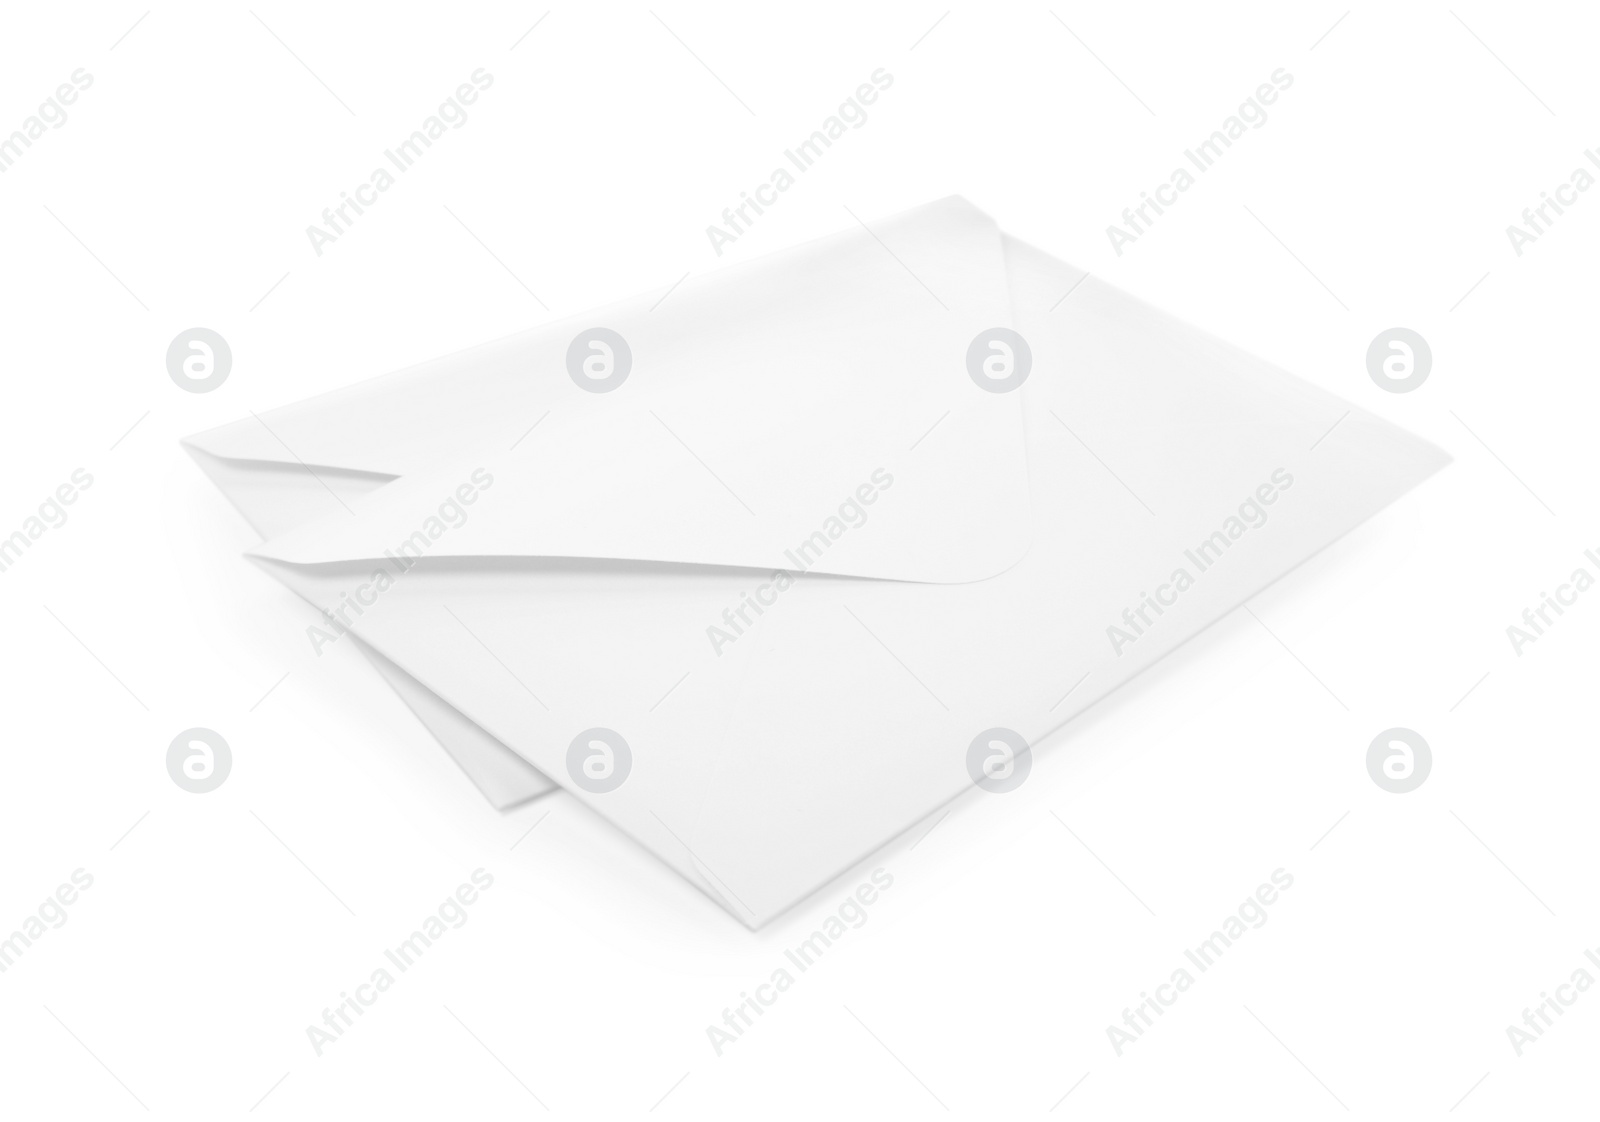 Photo of Two simple paper envelopes on white background